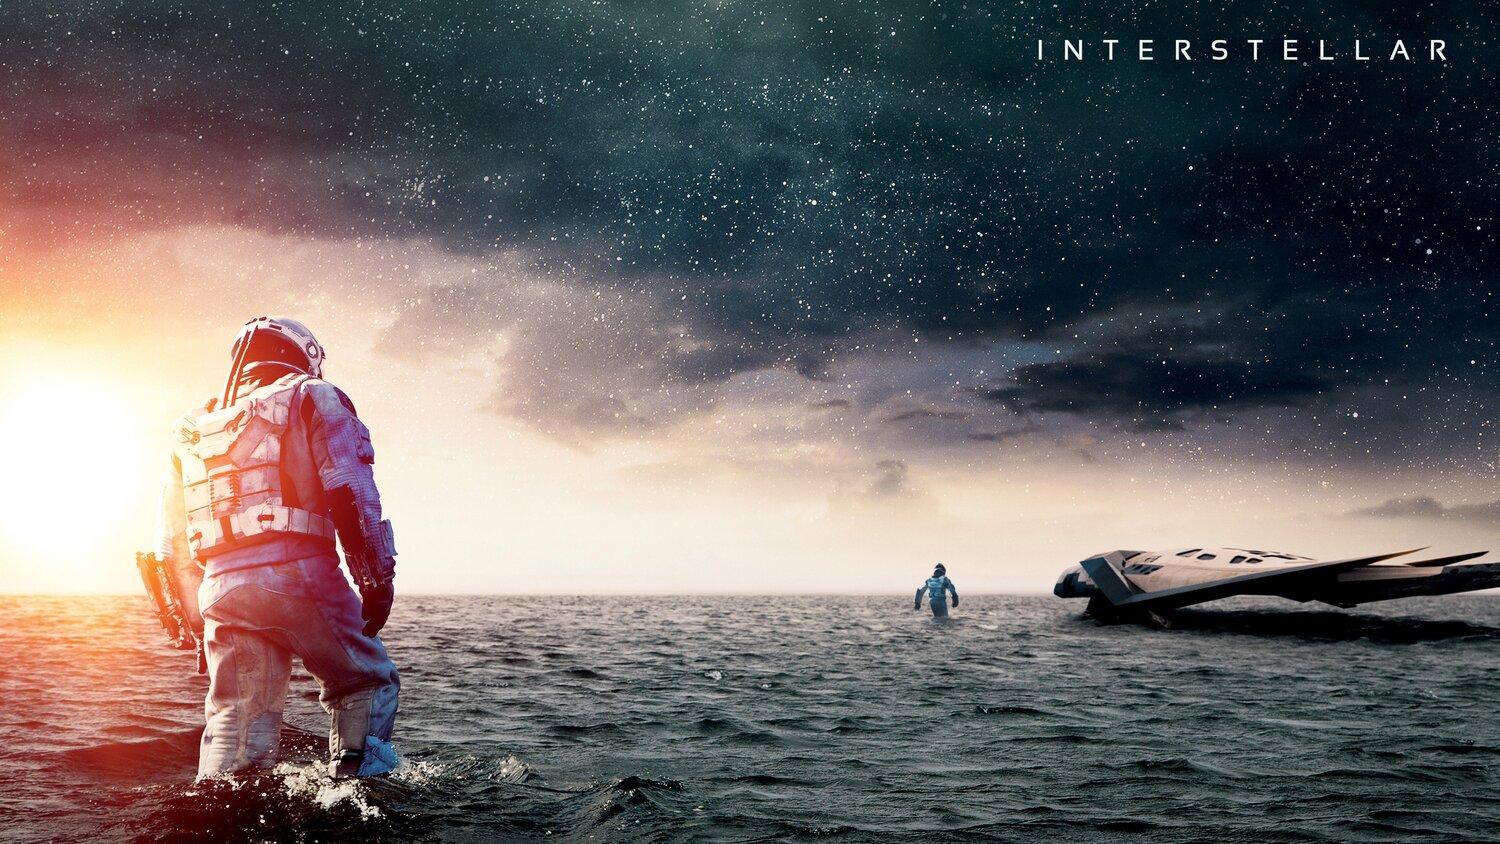 An astronaut standing knee-deep in water looking at a space ship.